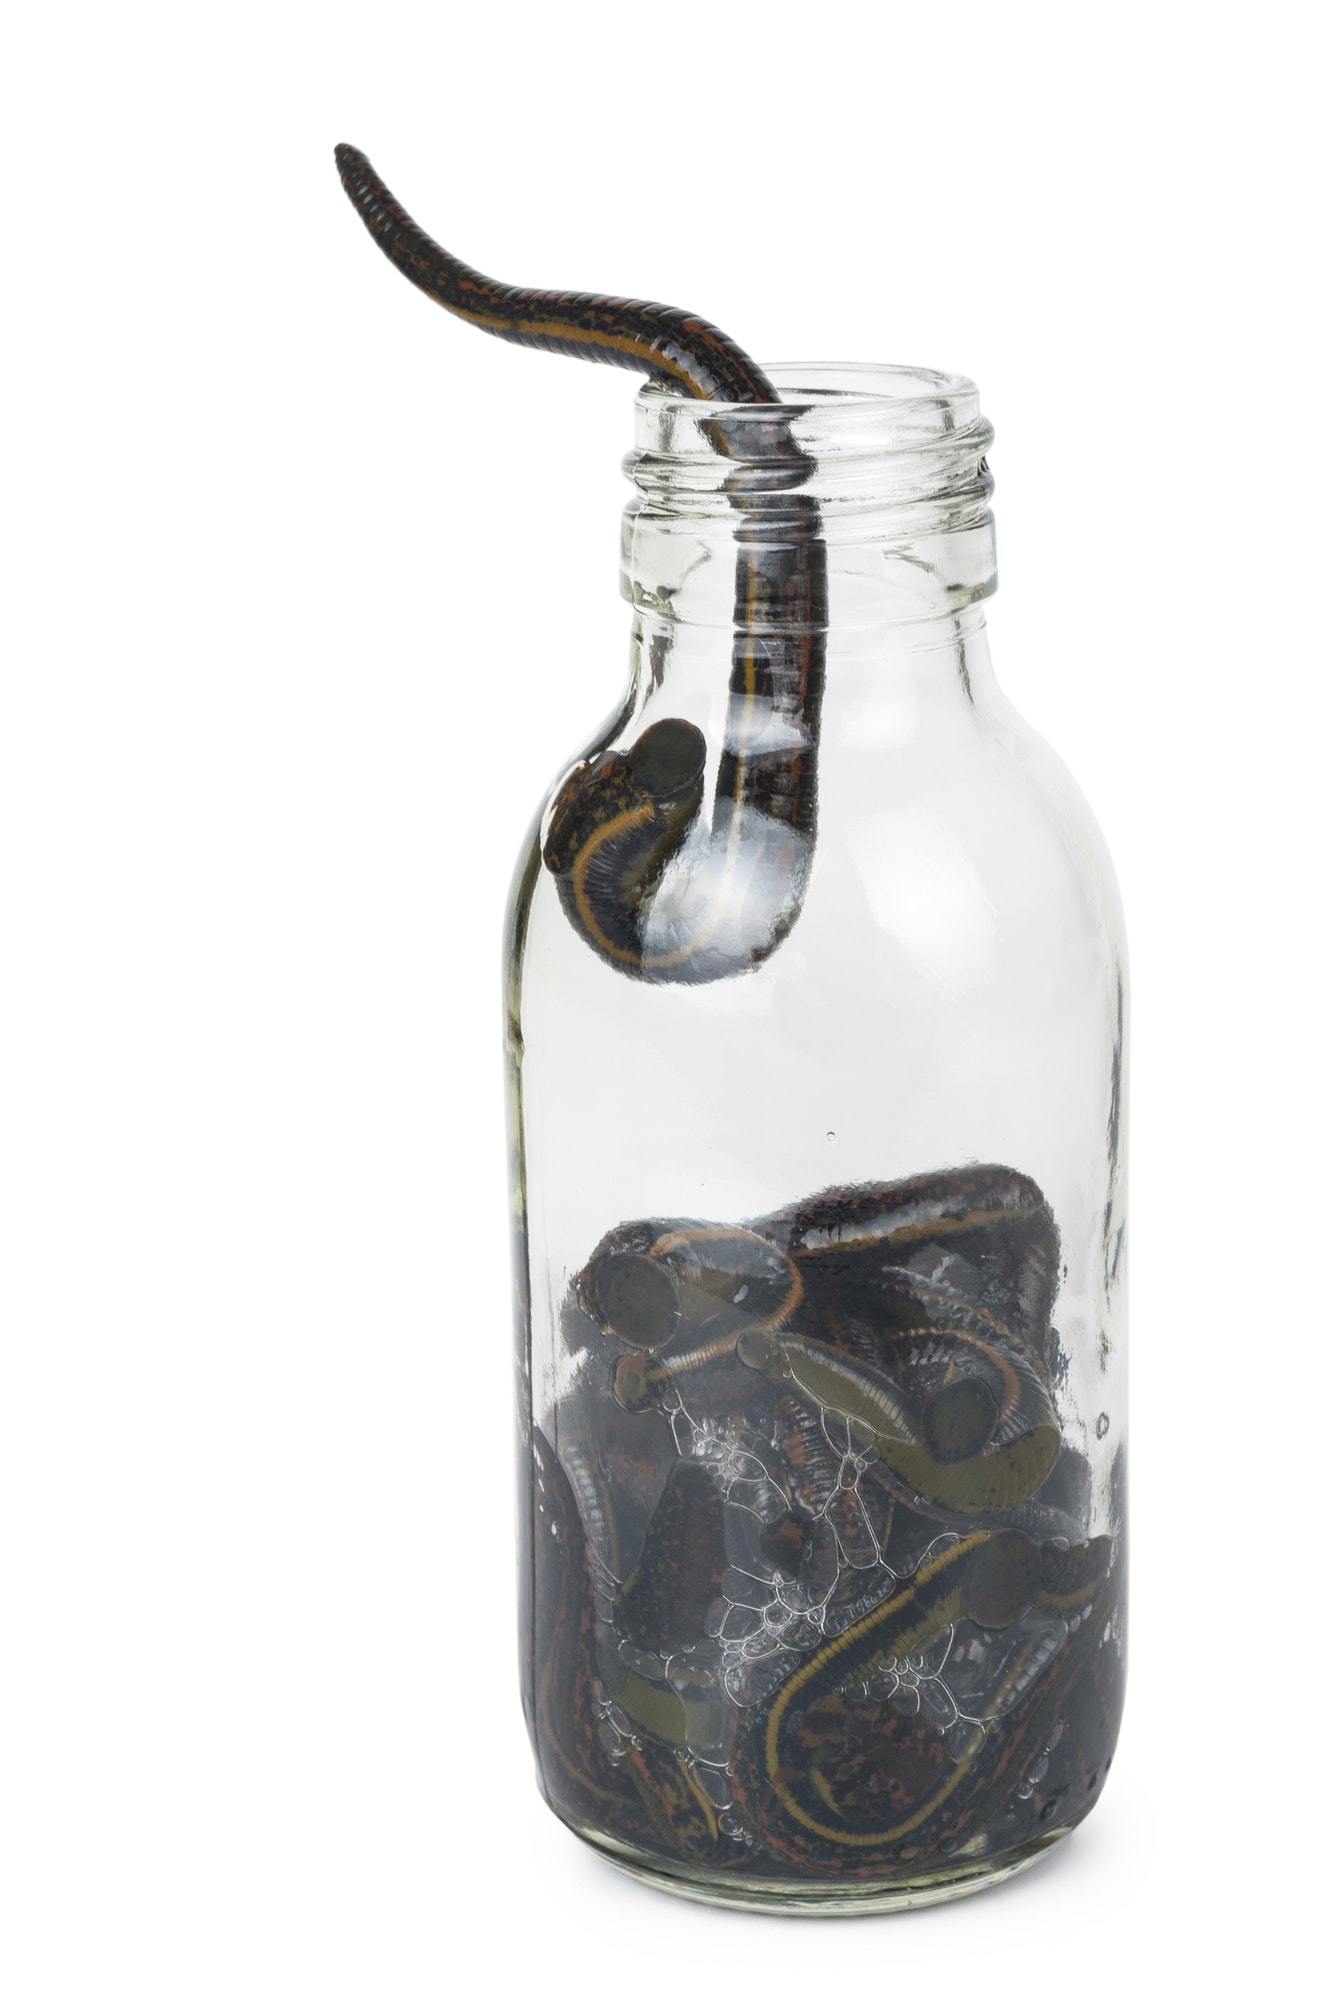 Medical leeches in a glass bottle